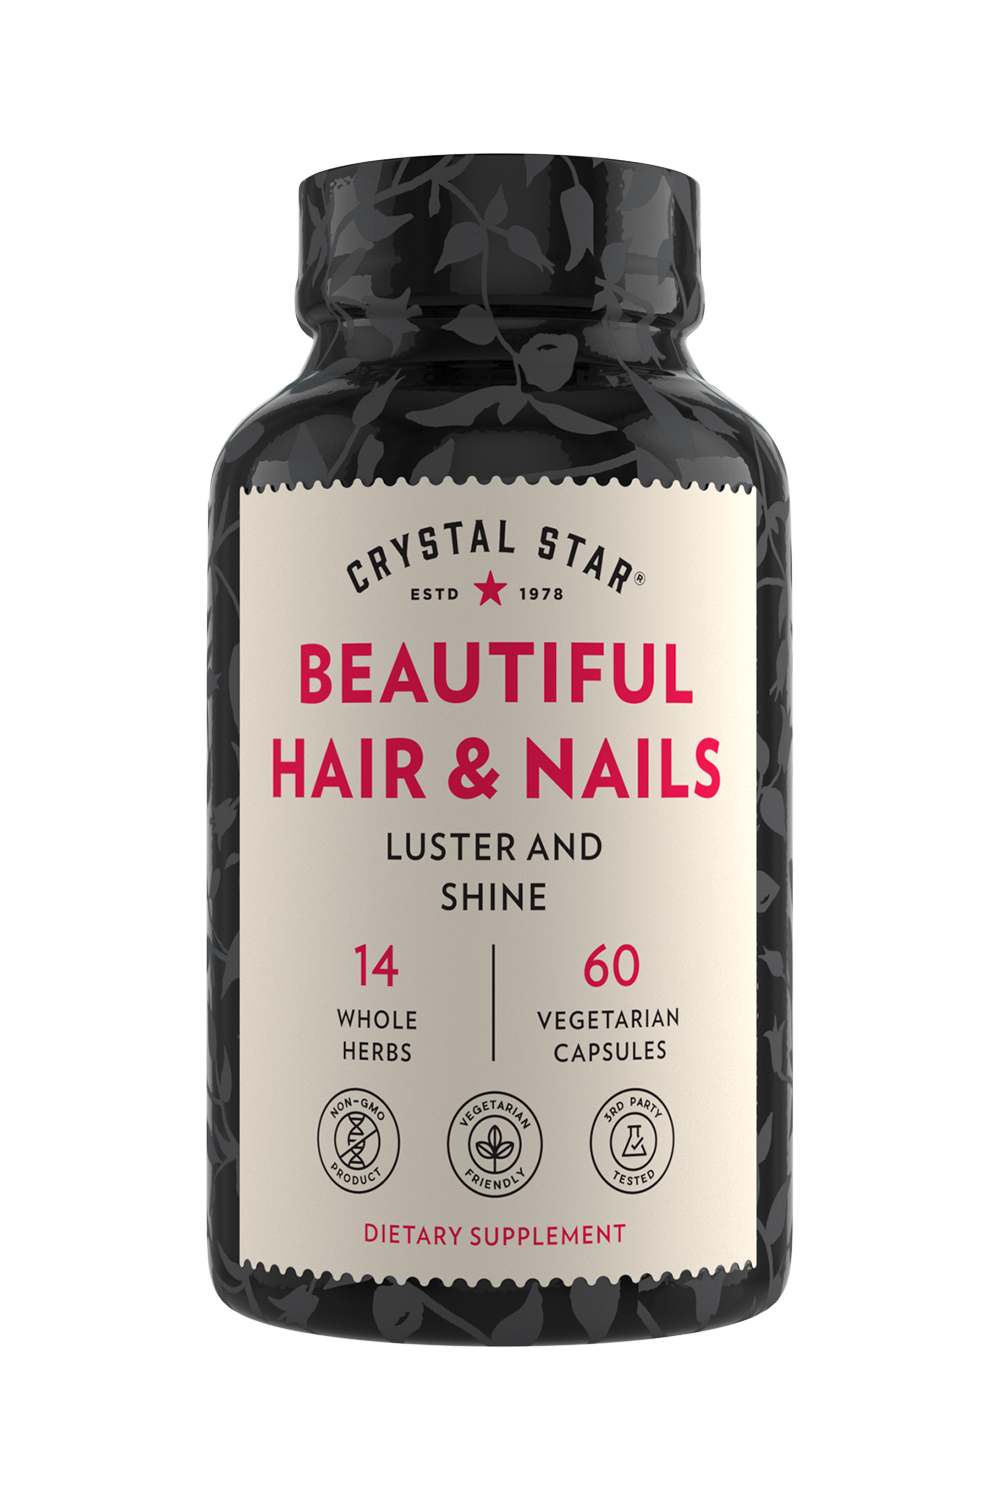 Crystal Star Beautiful Hair & Nails supplement for luster and shine, Front Side